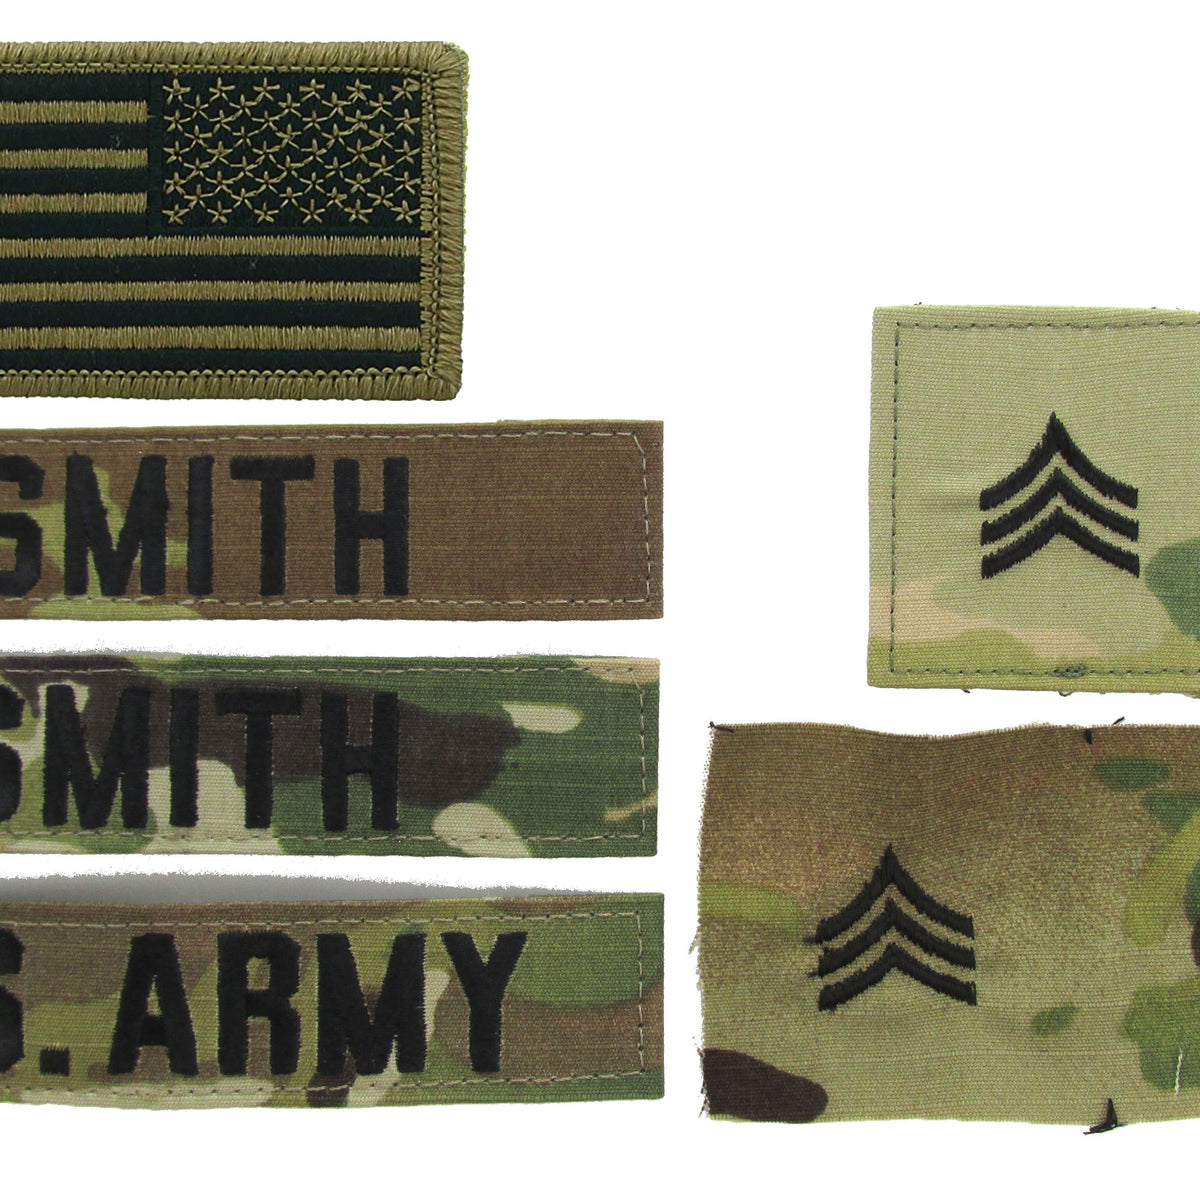 U.S. Army OCP Scorpion NAME TAPES RANKS AND HELMET BAND SEW ON 12 PC